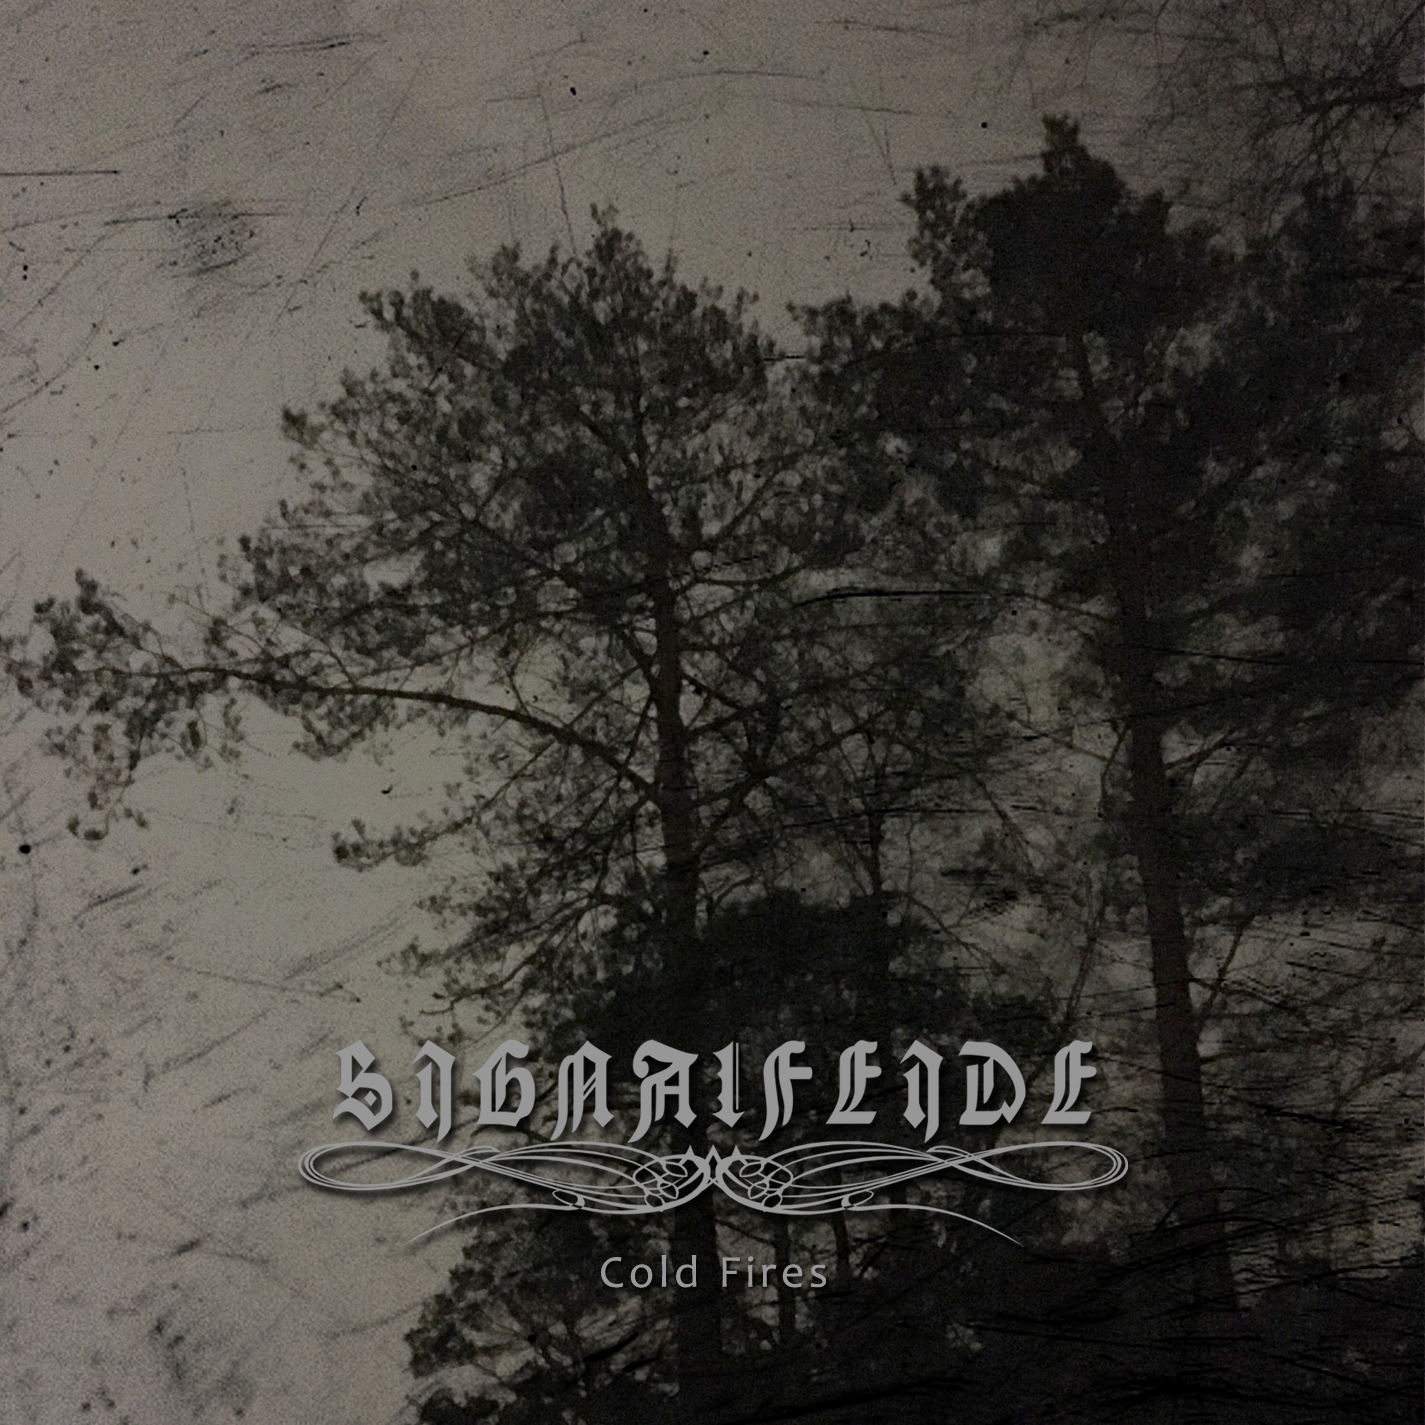 SIGNALFEIDE Unleashes Cold Fires